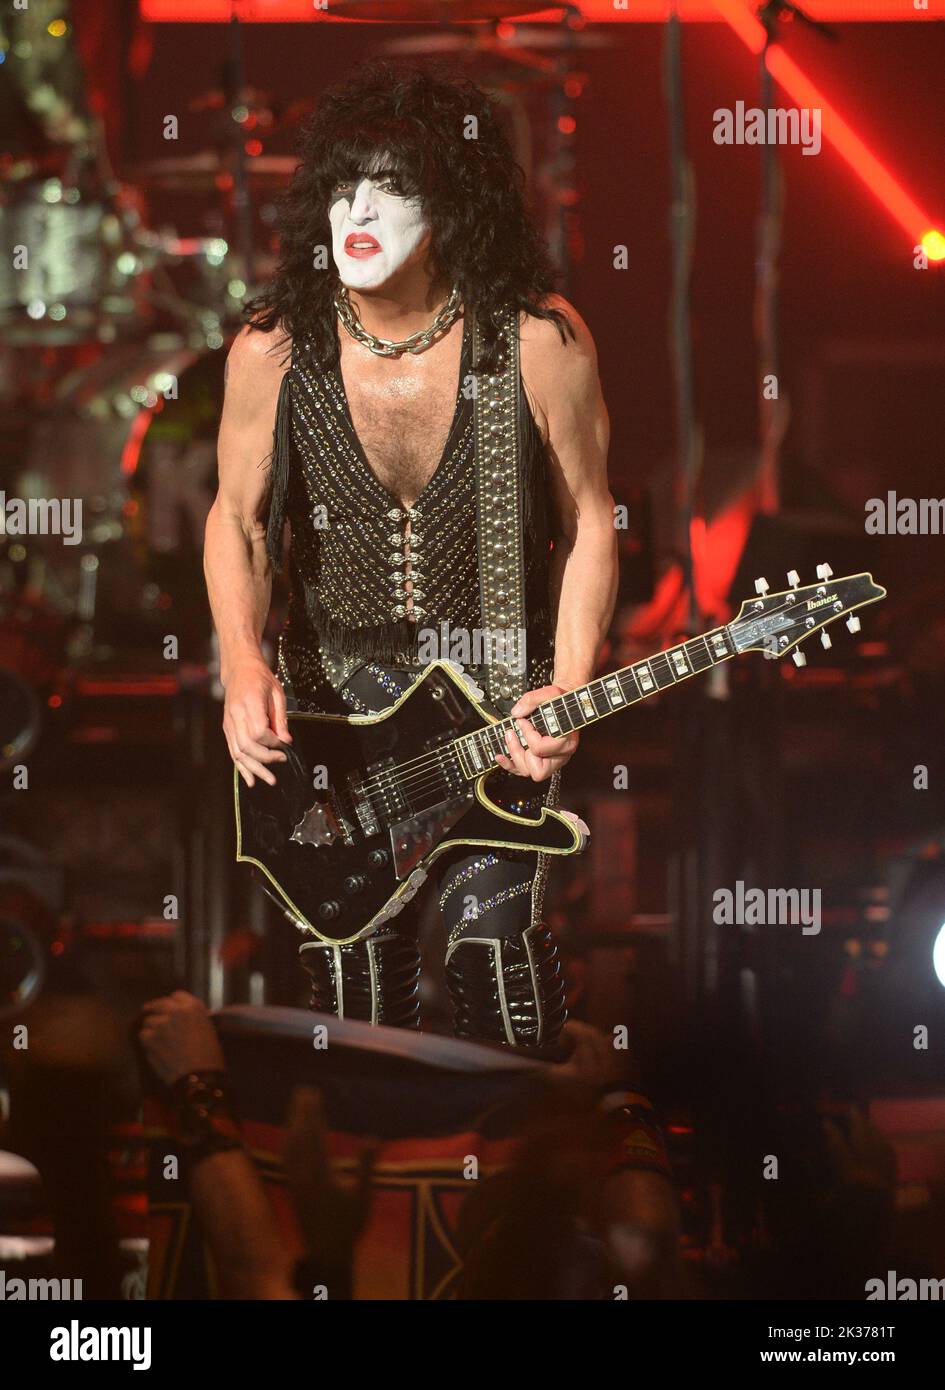 West Palm Beach, FL, USA. 21st Sep, 2022. KISS performs during the 'End of the Road World Tour' at The iTHINK Financial Amphitheatre on September 21, 2022 in West Palm Beach Florida. Credit: Mpi04/Media Punch/Alamy Live News Stock Photo